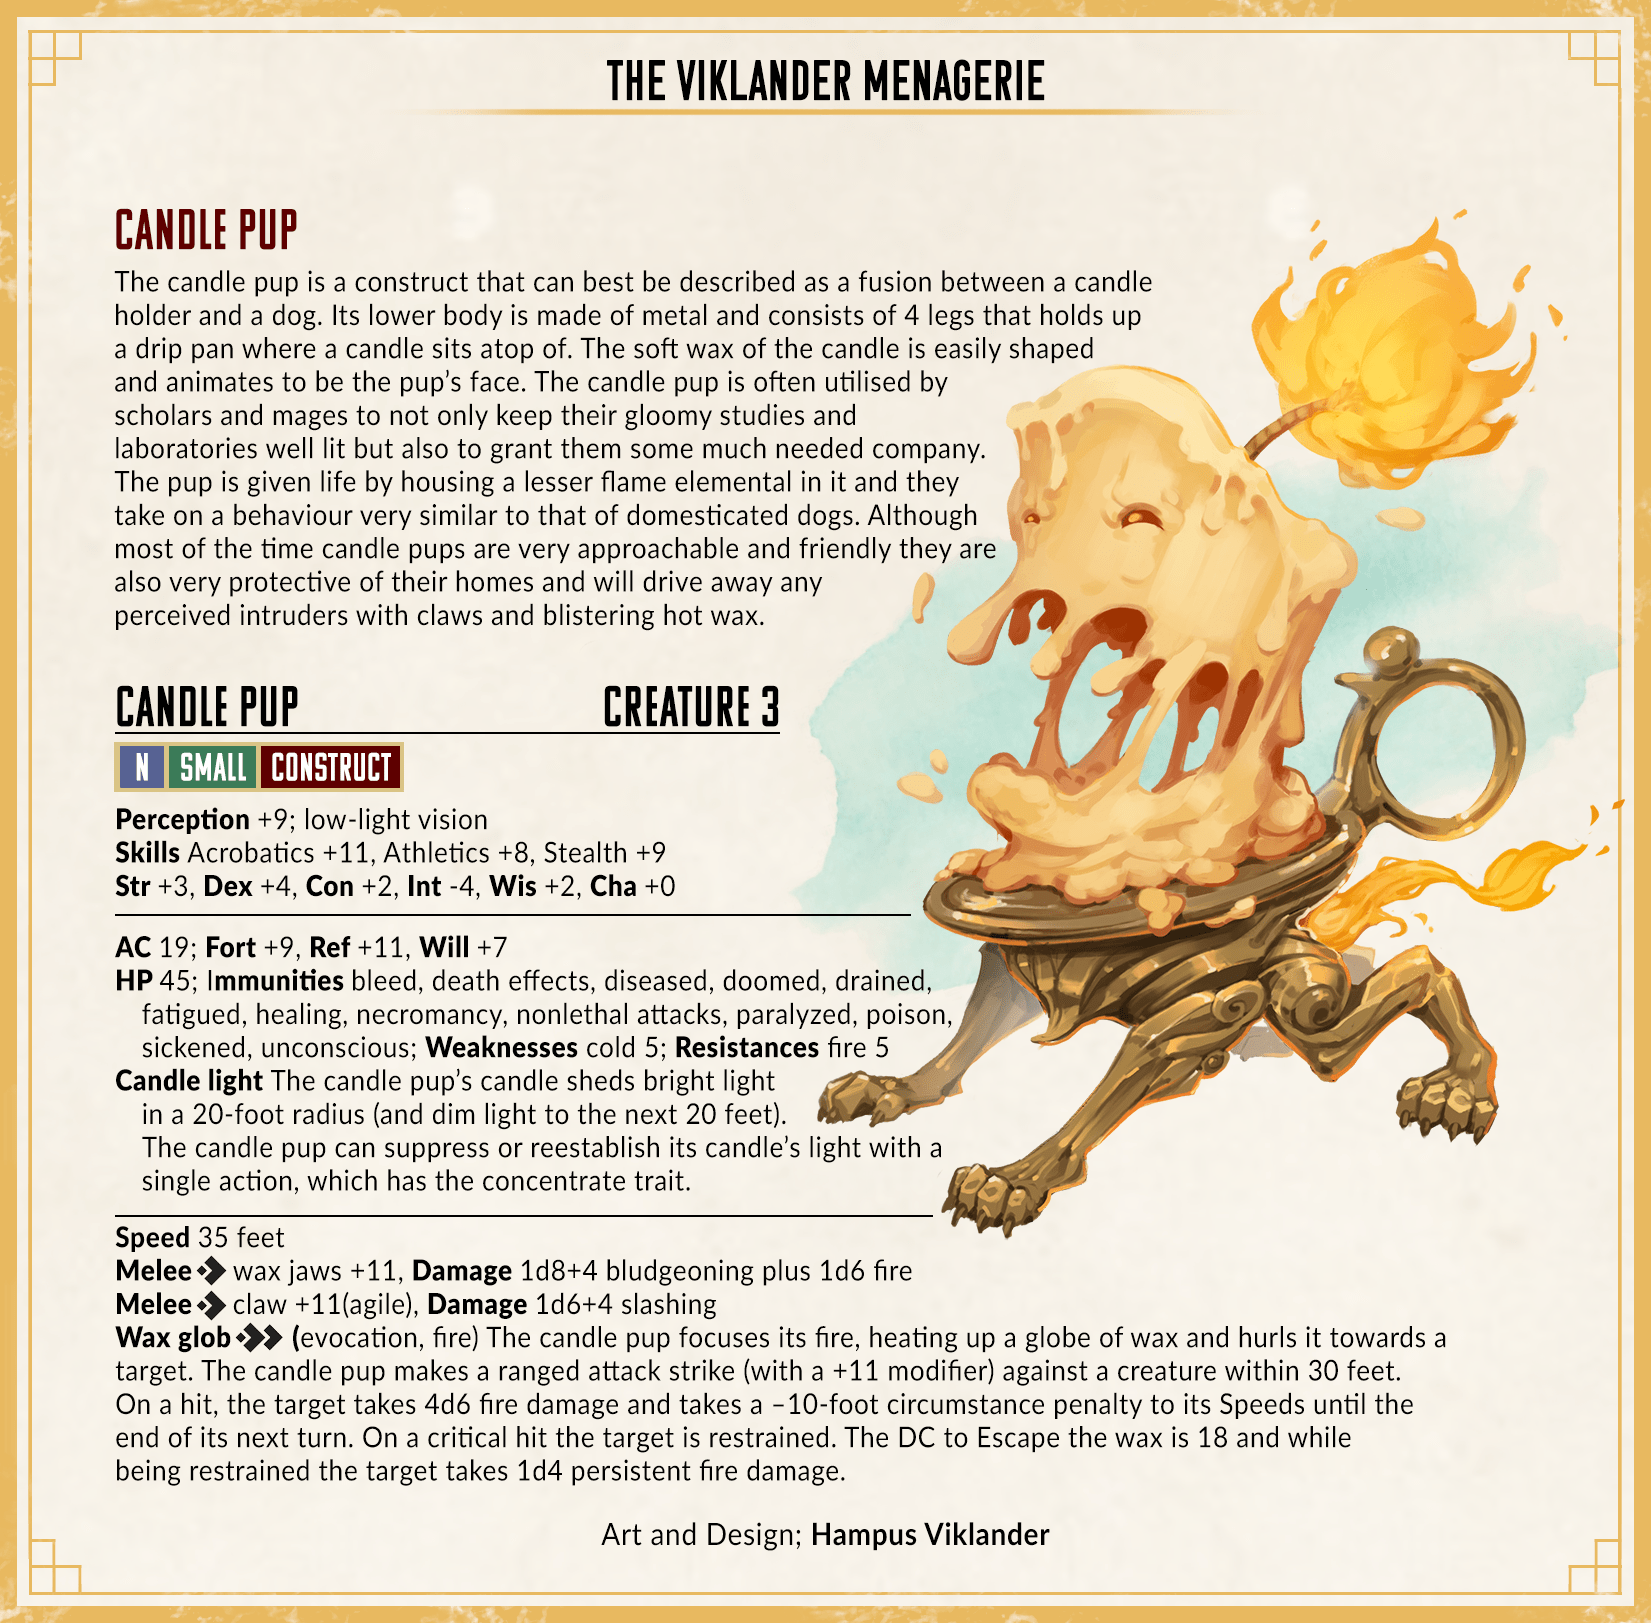 Alle bid Salg hampus viklander on Twitter: "This week's menagerie entry continues my "lil  guy" type of creatures. Say hi to the Candle pup a being that brings light  and liveliness to any mage tower! #